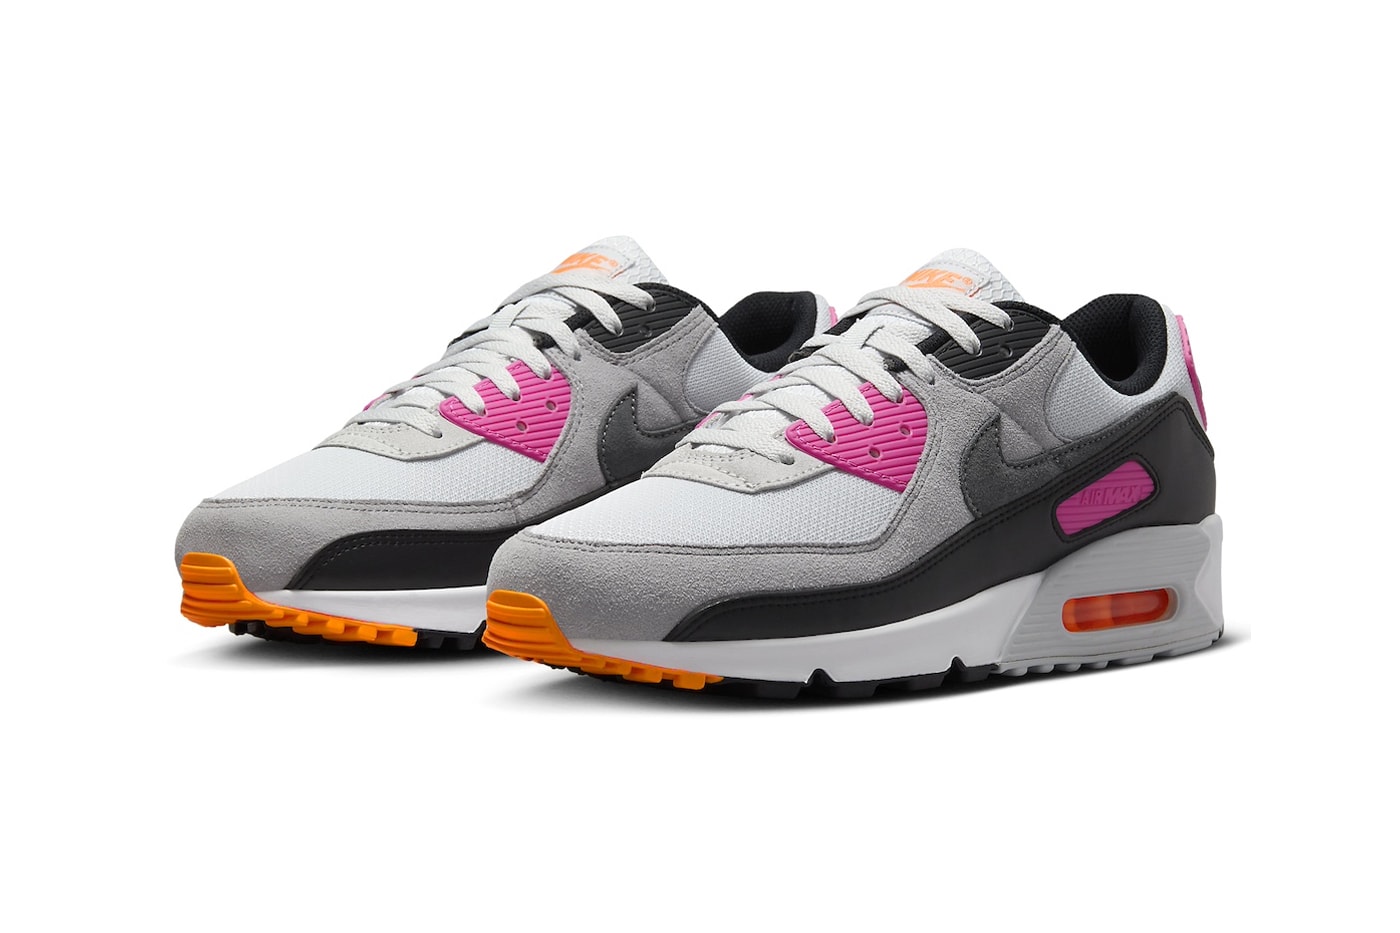 Nike Air Max 90 "Dunkin' Donuts" Has Surfaced Pure Platinum/Cool Grey-Alchemy Pink FN6958-003 ben affleck